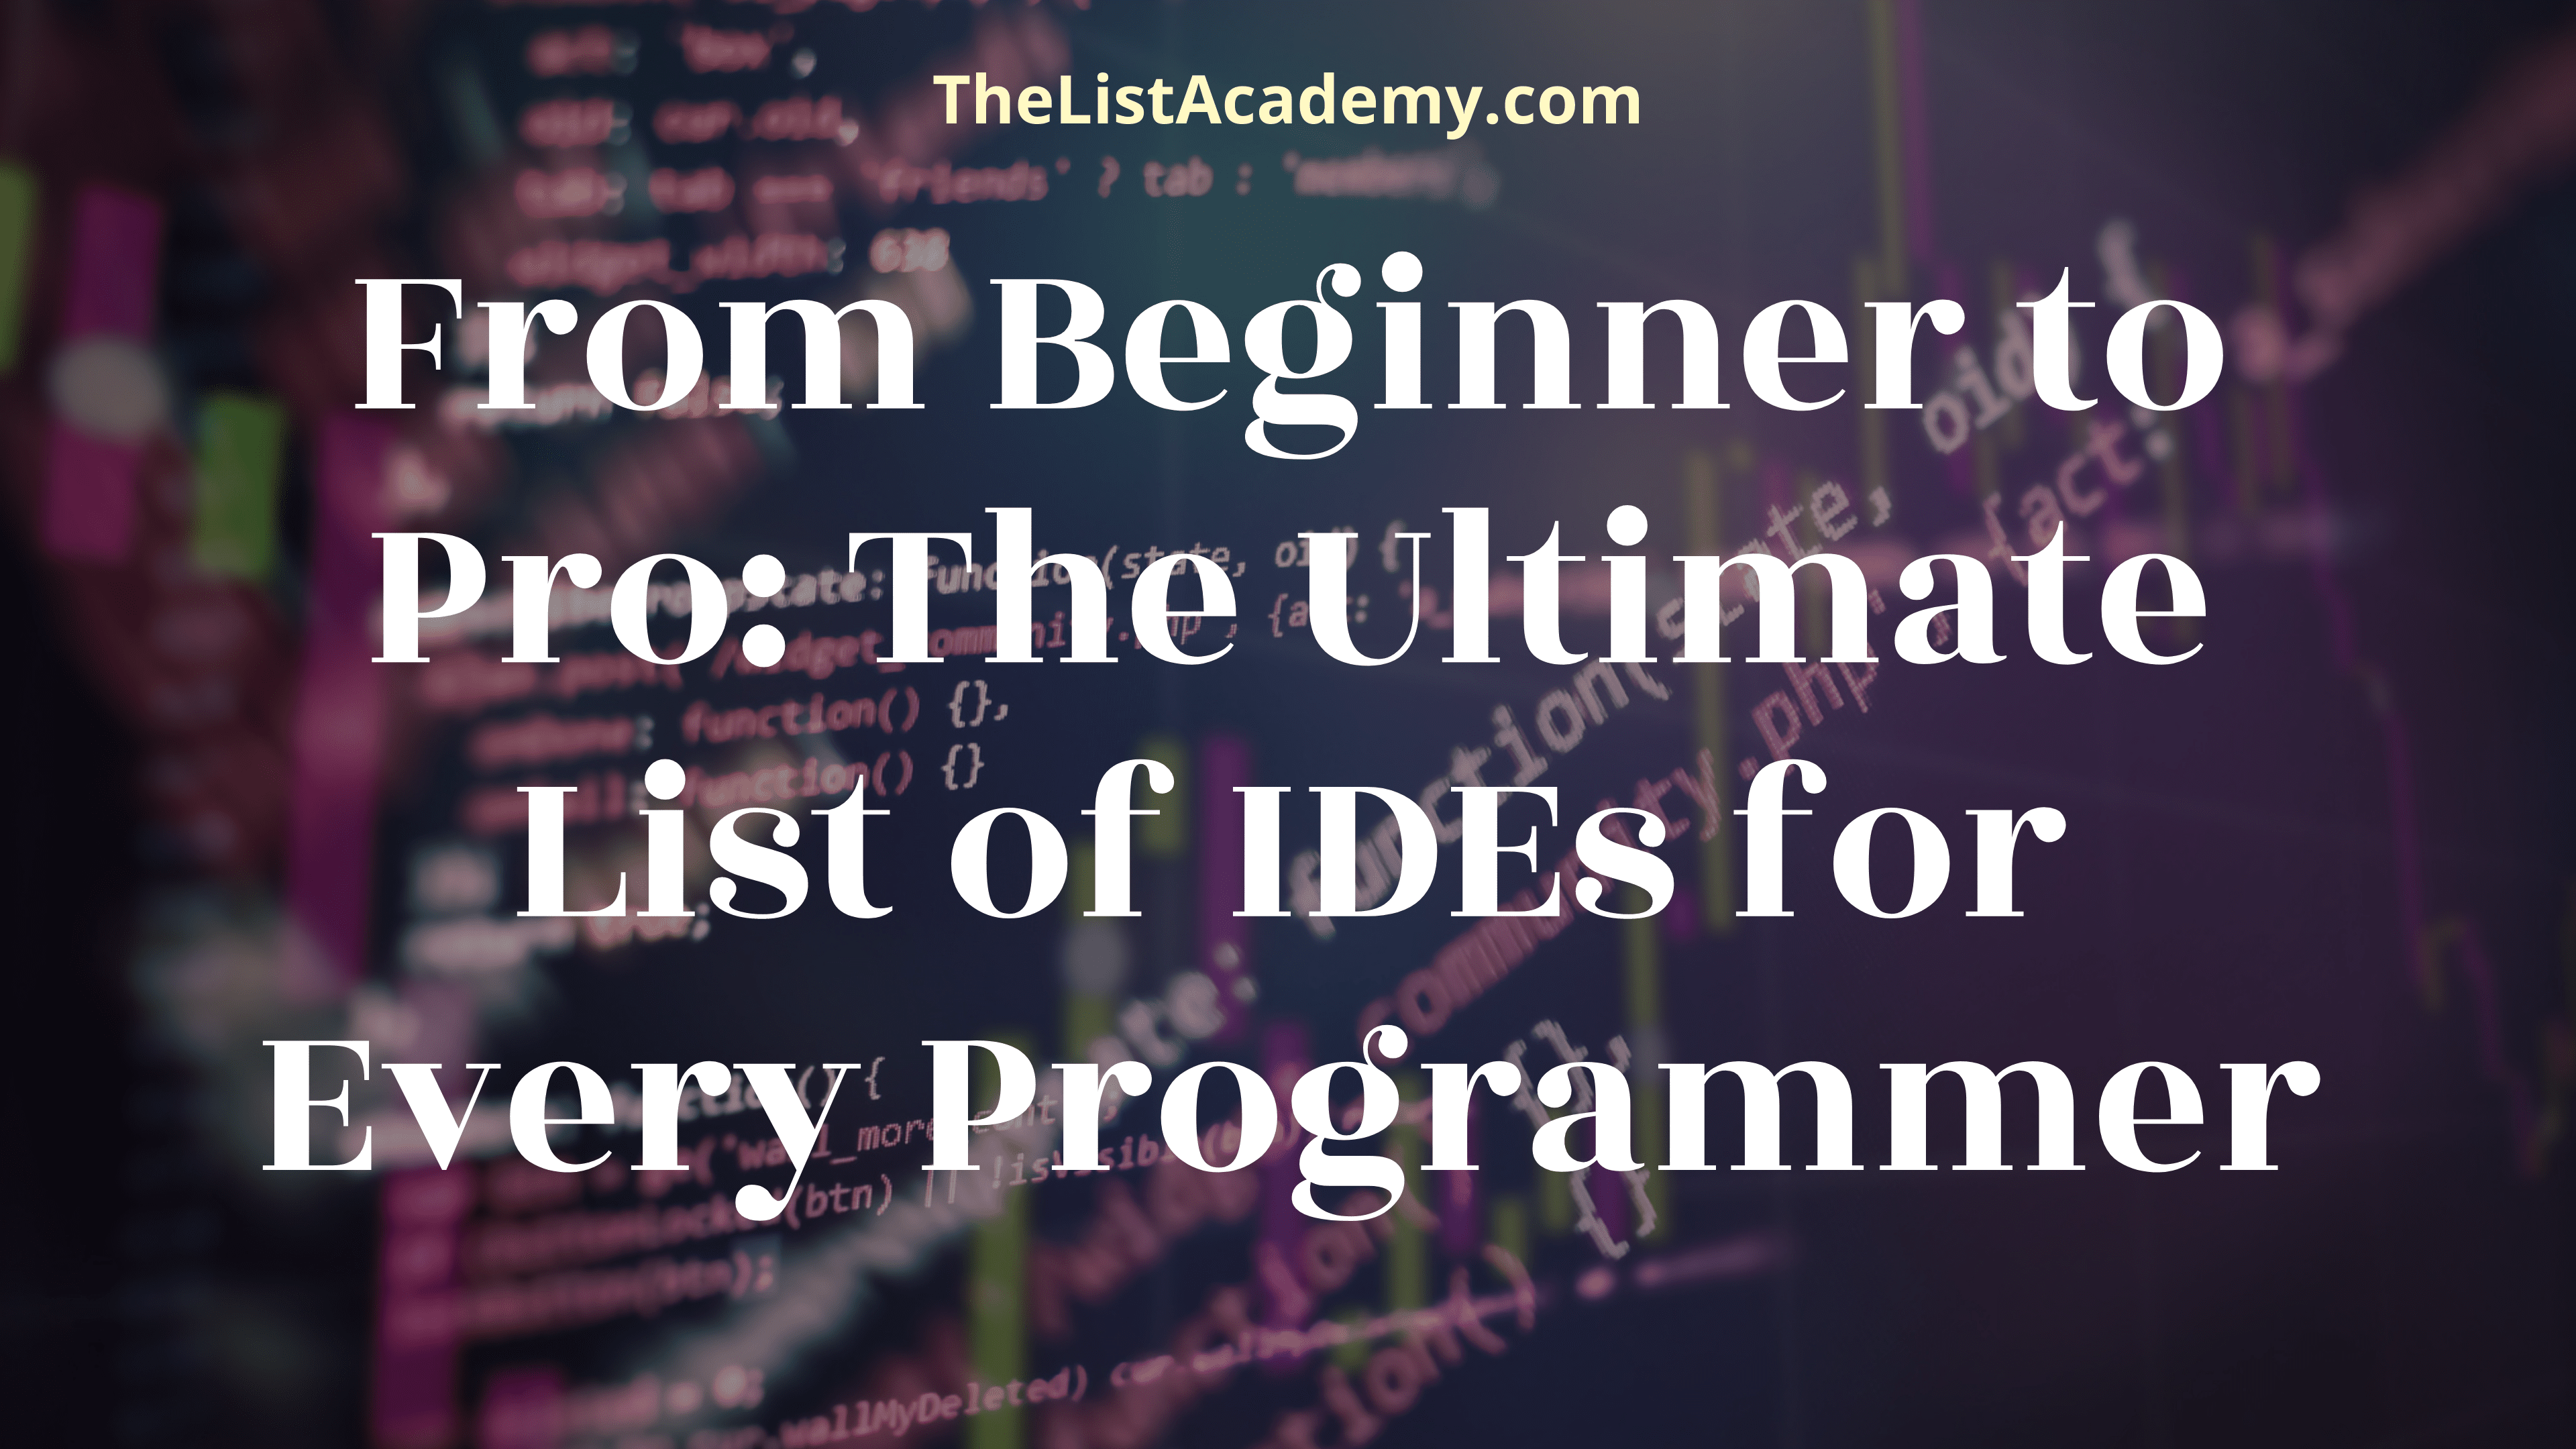 Cover Image For List : From Beginner To Pro: The Ultimate List Of  50 Ides For Every Programmer